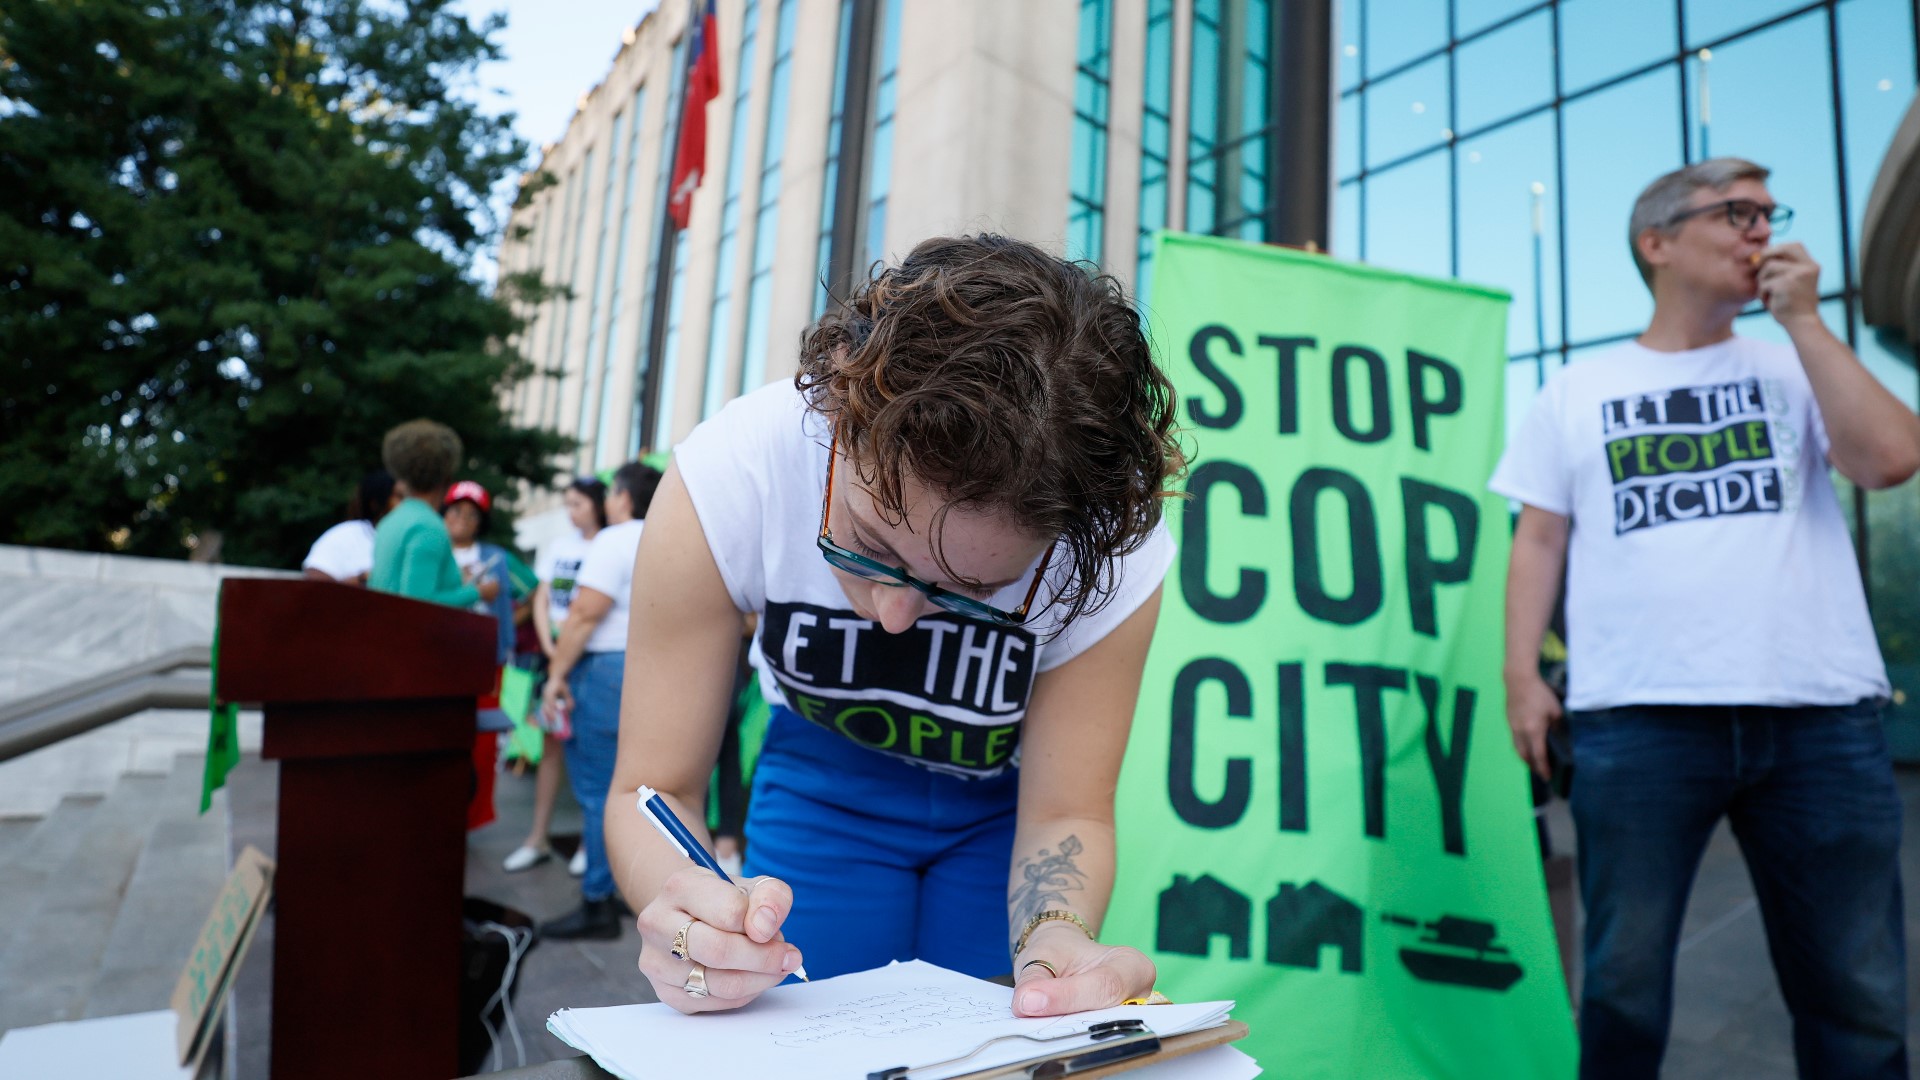 An analysis by four news organizations finds the outcome — if city officials ever count the petitions — could be decided by a narrow margin.